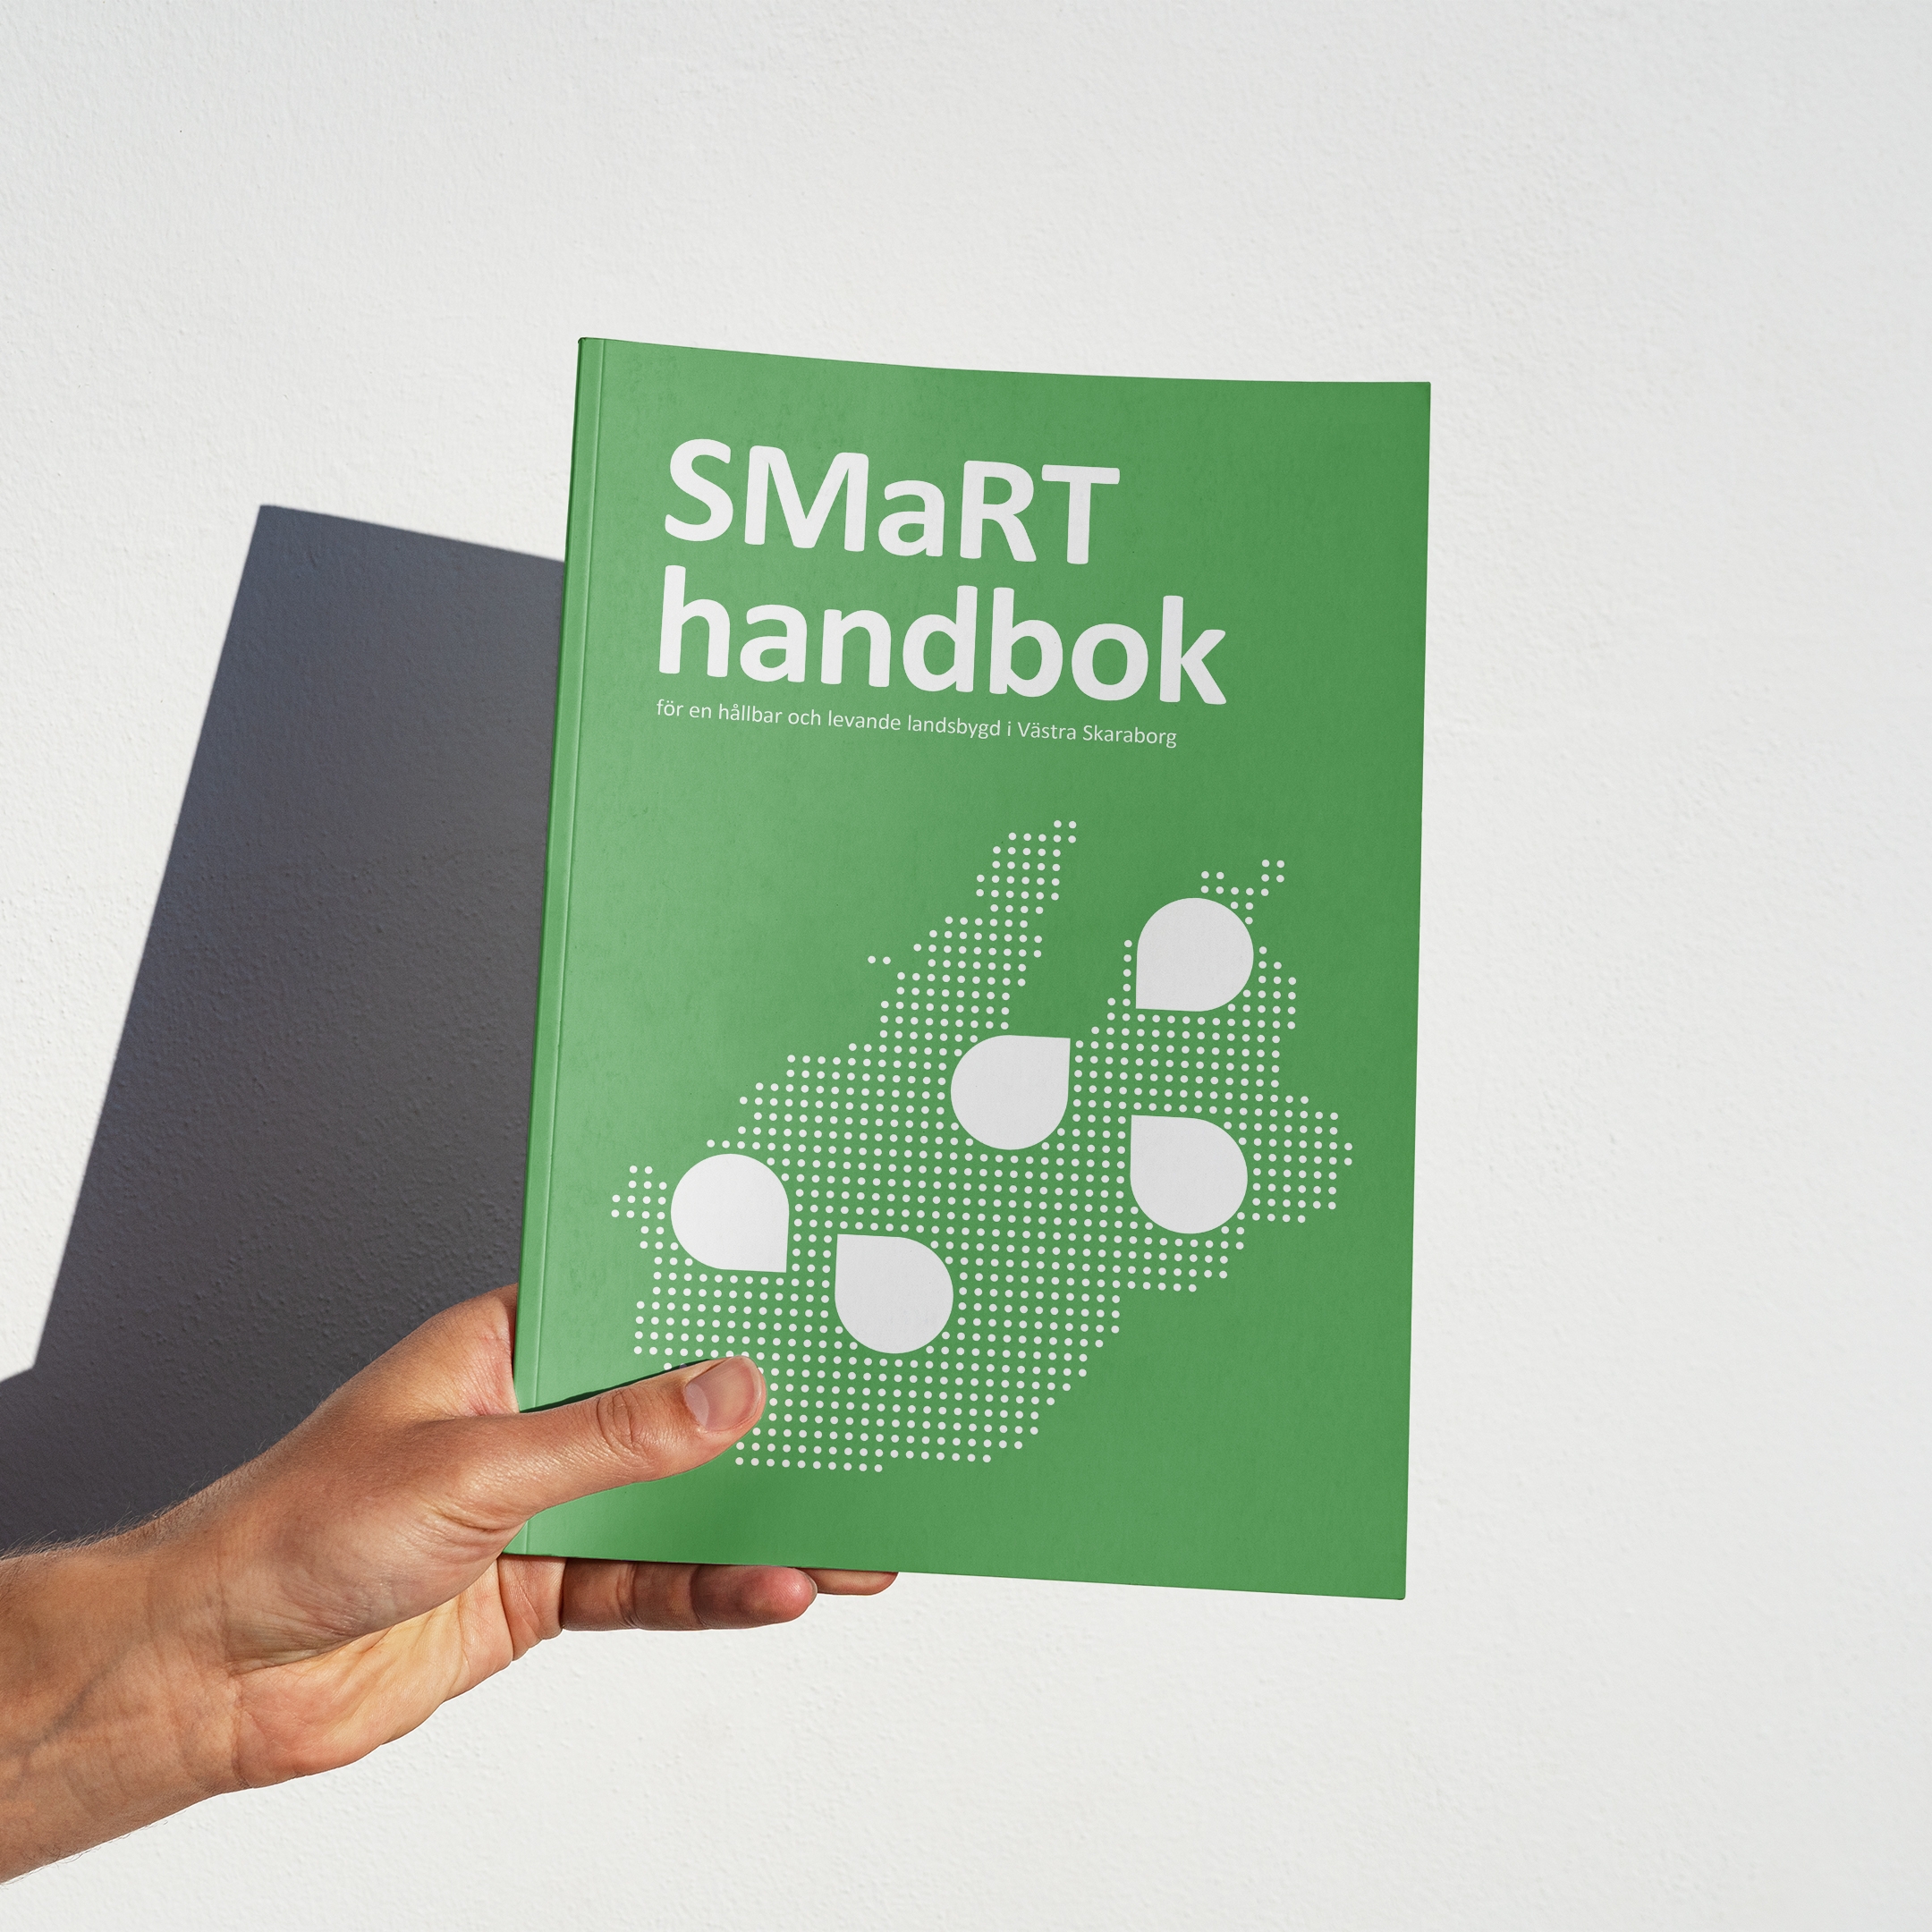 A SMaRT handbook for better and more sustainable mobility in rural areas.